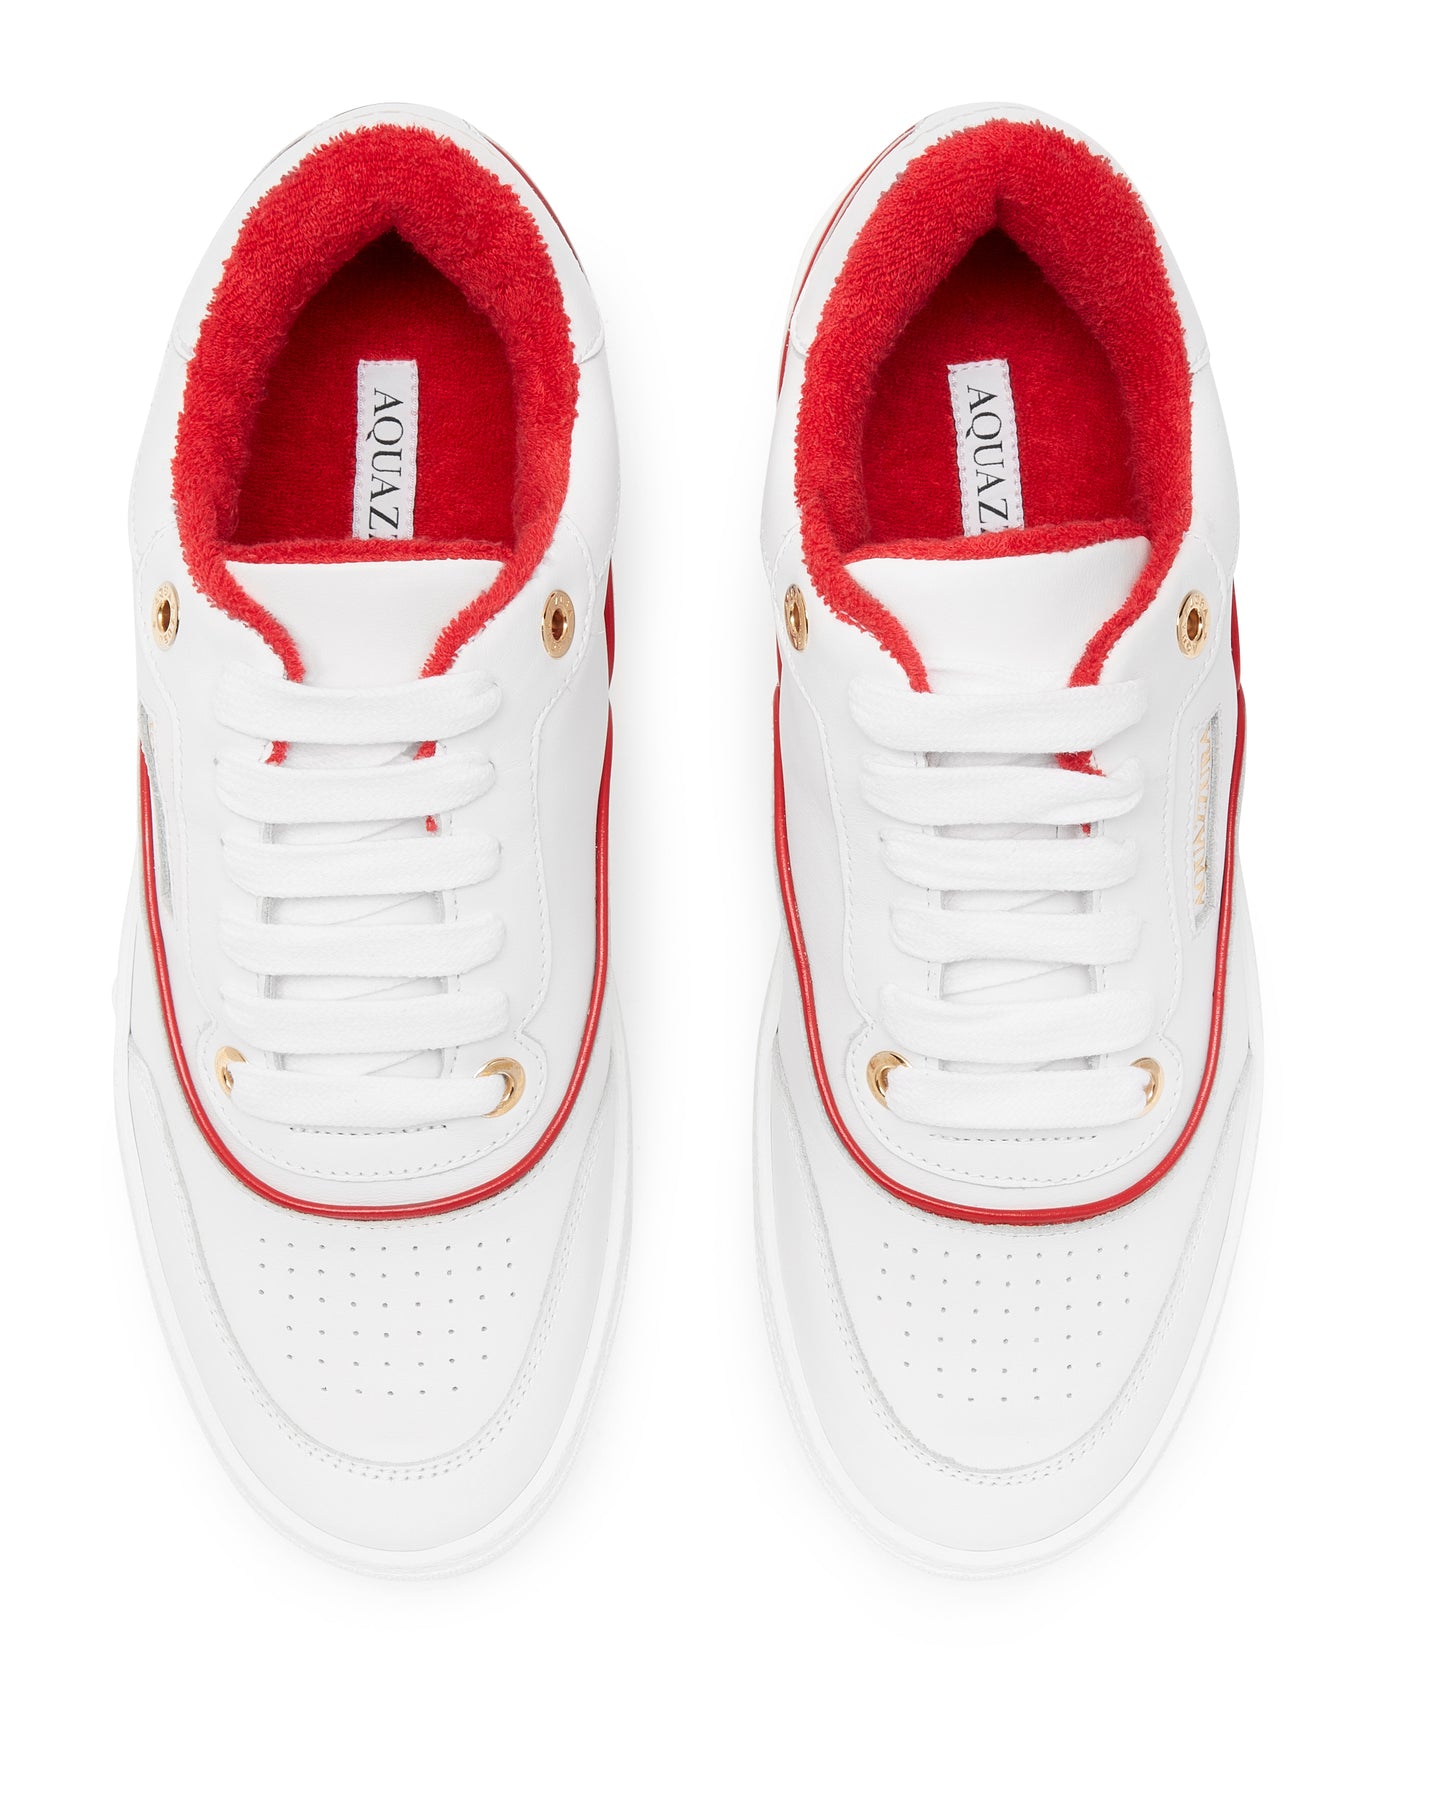 A 25 SNEAKER WHITE/RED